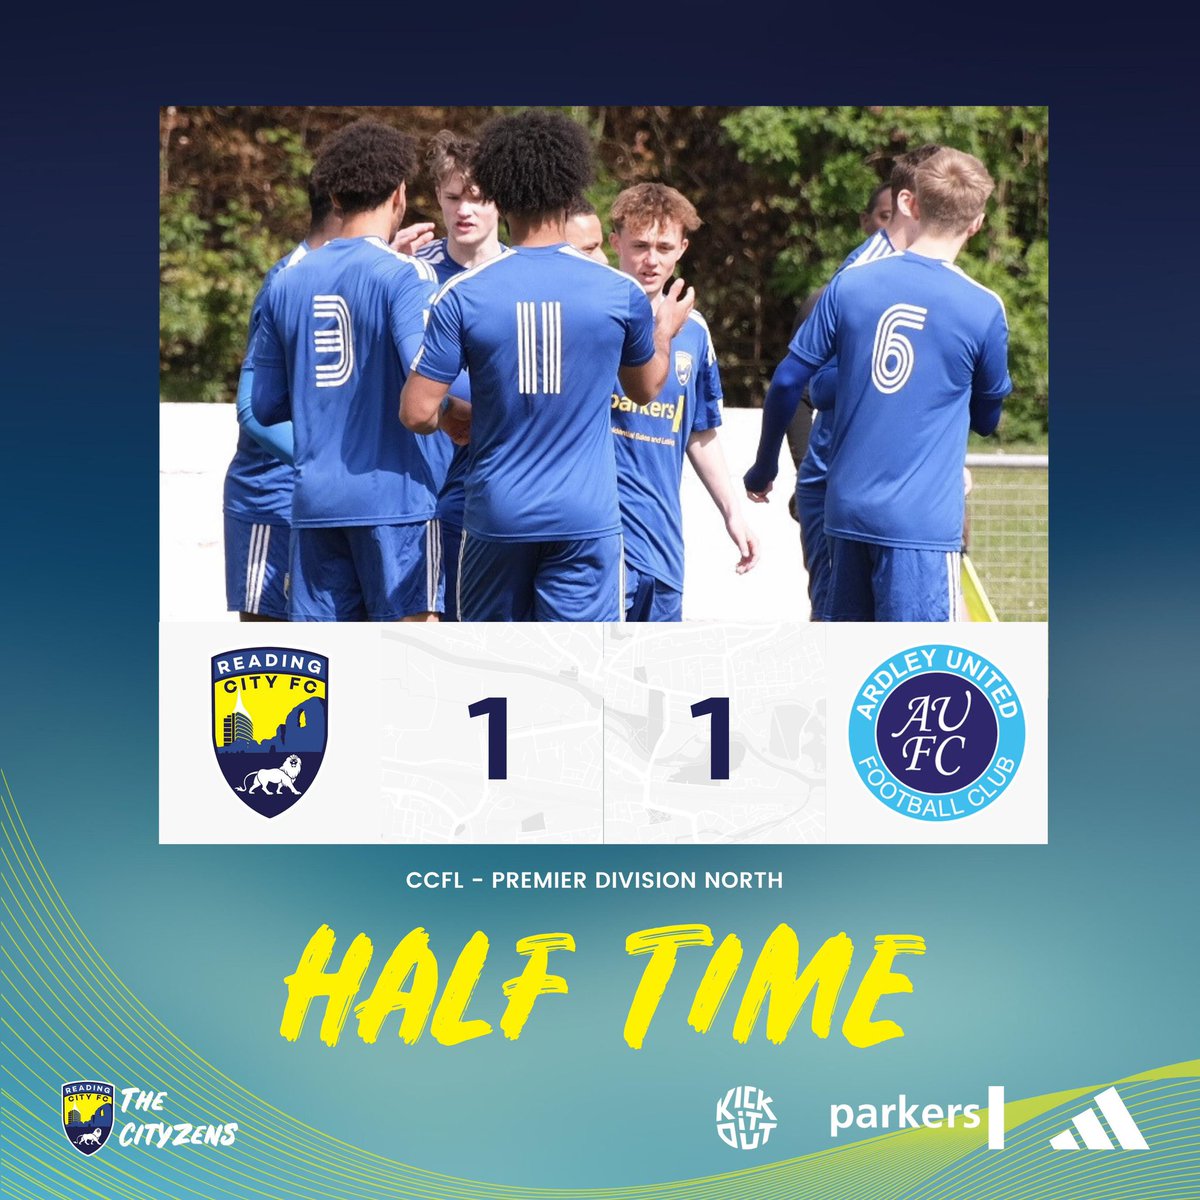 ⚡️ A lightning start, but our visitors have weathered the thunderstorm so far and have even nicked a goal for themselves… #City1sts #ThePrideofReading